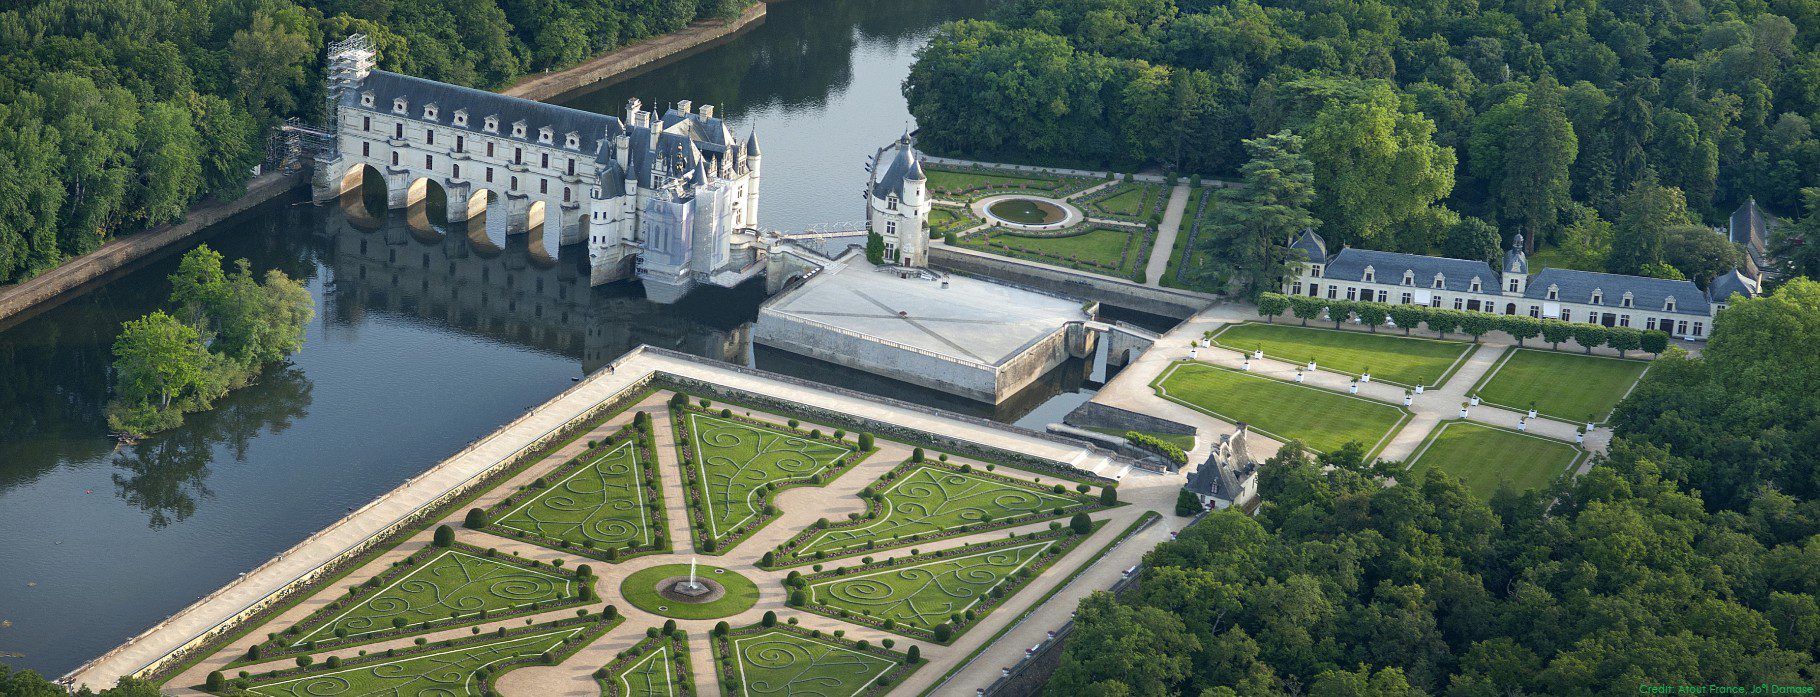 8 DAYS ROYAL JOURNEY IN THE LOIRE VALLEY